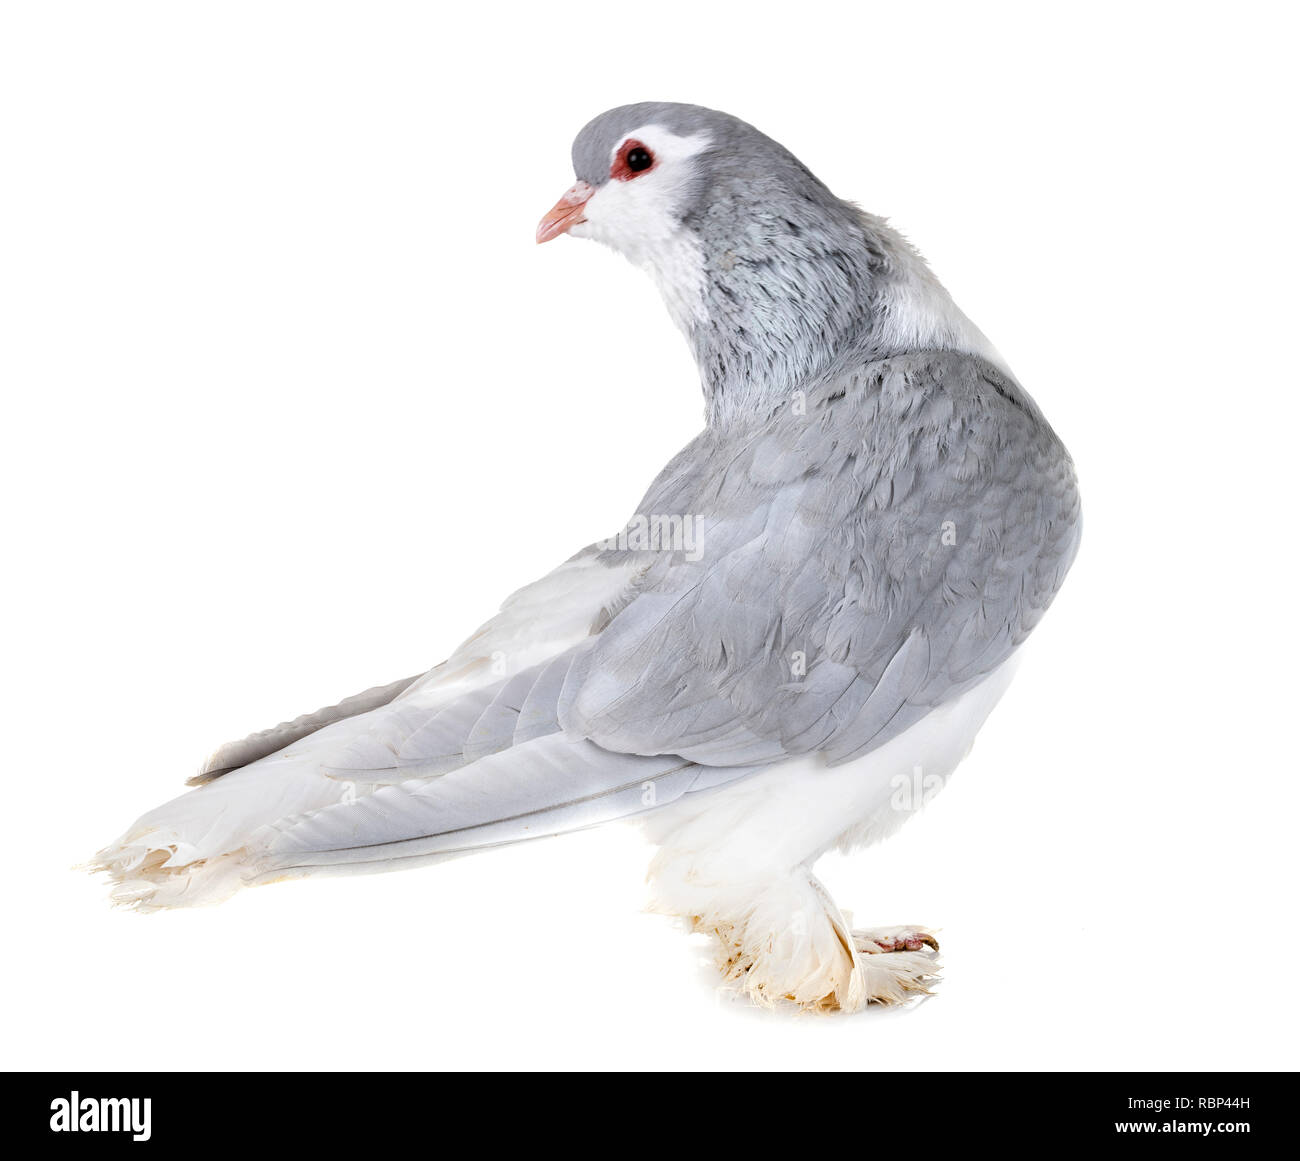 Pigeon Lahore in front of white background Banque D'Images